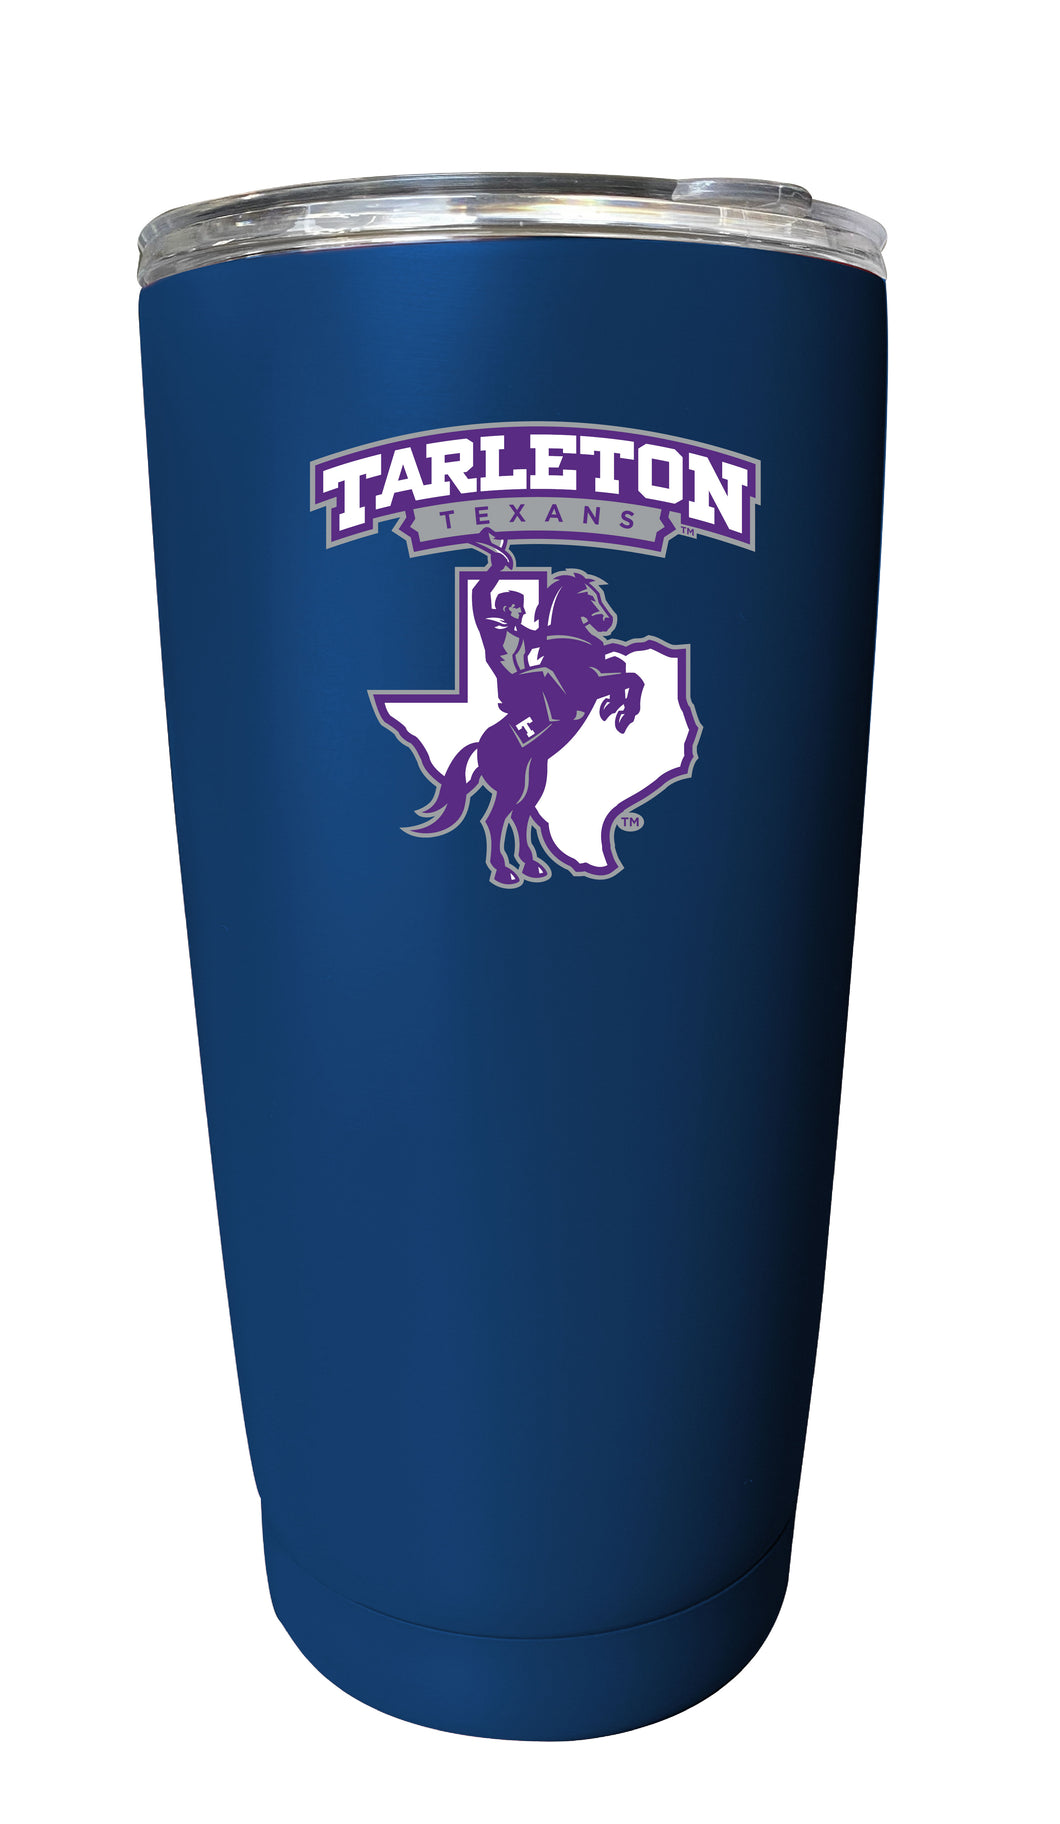 Tarleton State University 16 oz Insulated Stainless Steel Tumbler - Choose Your Color.